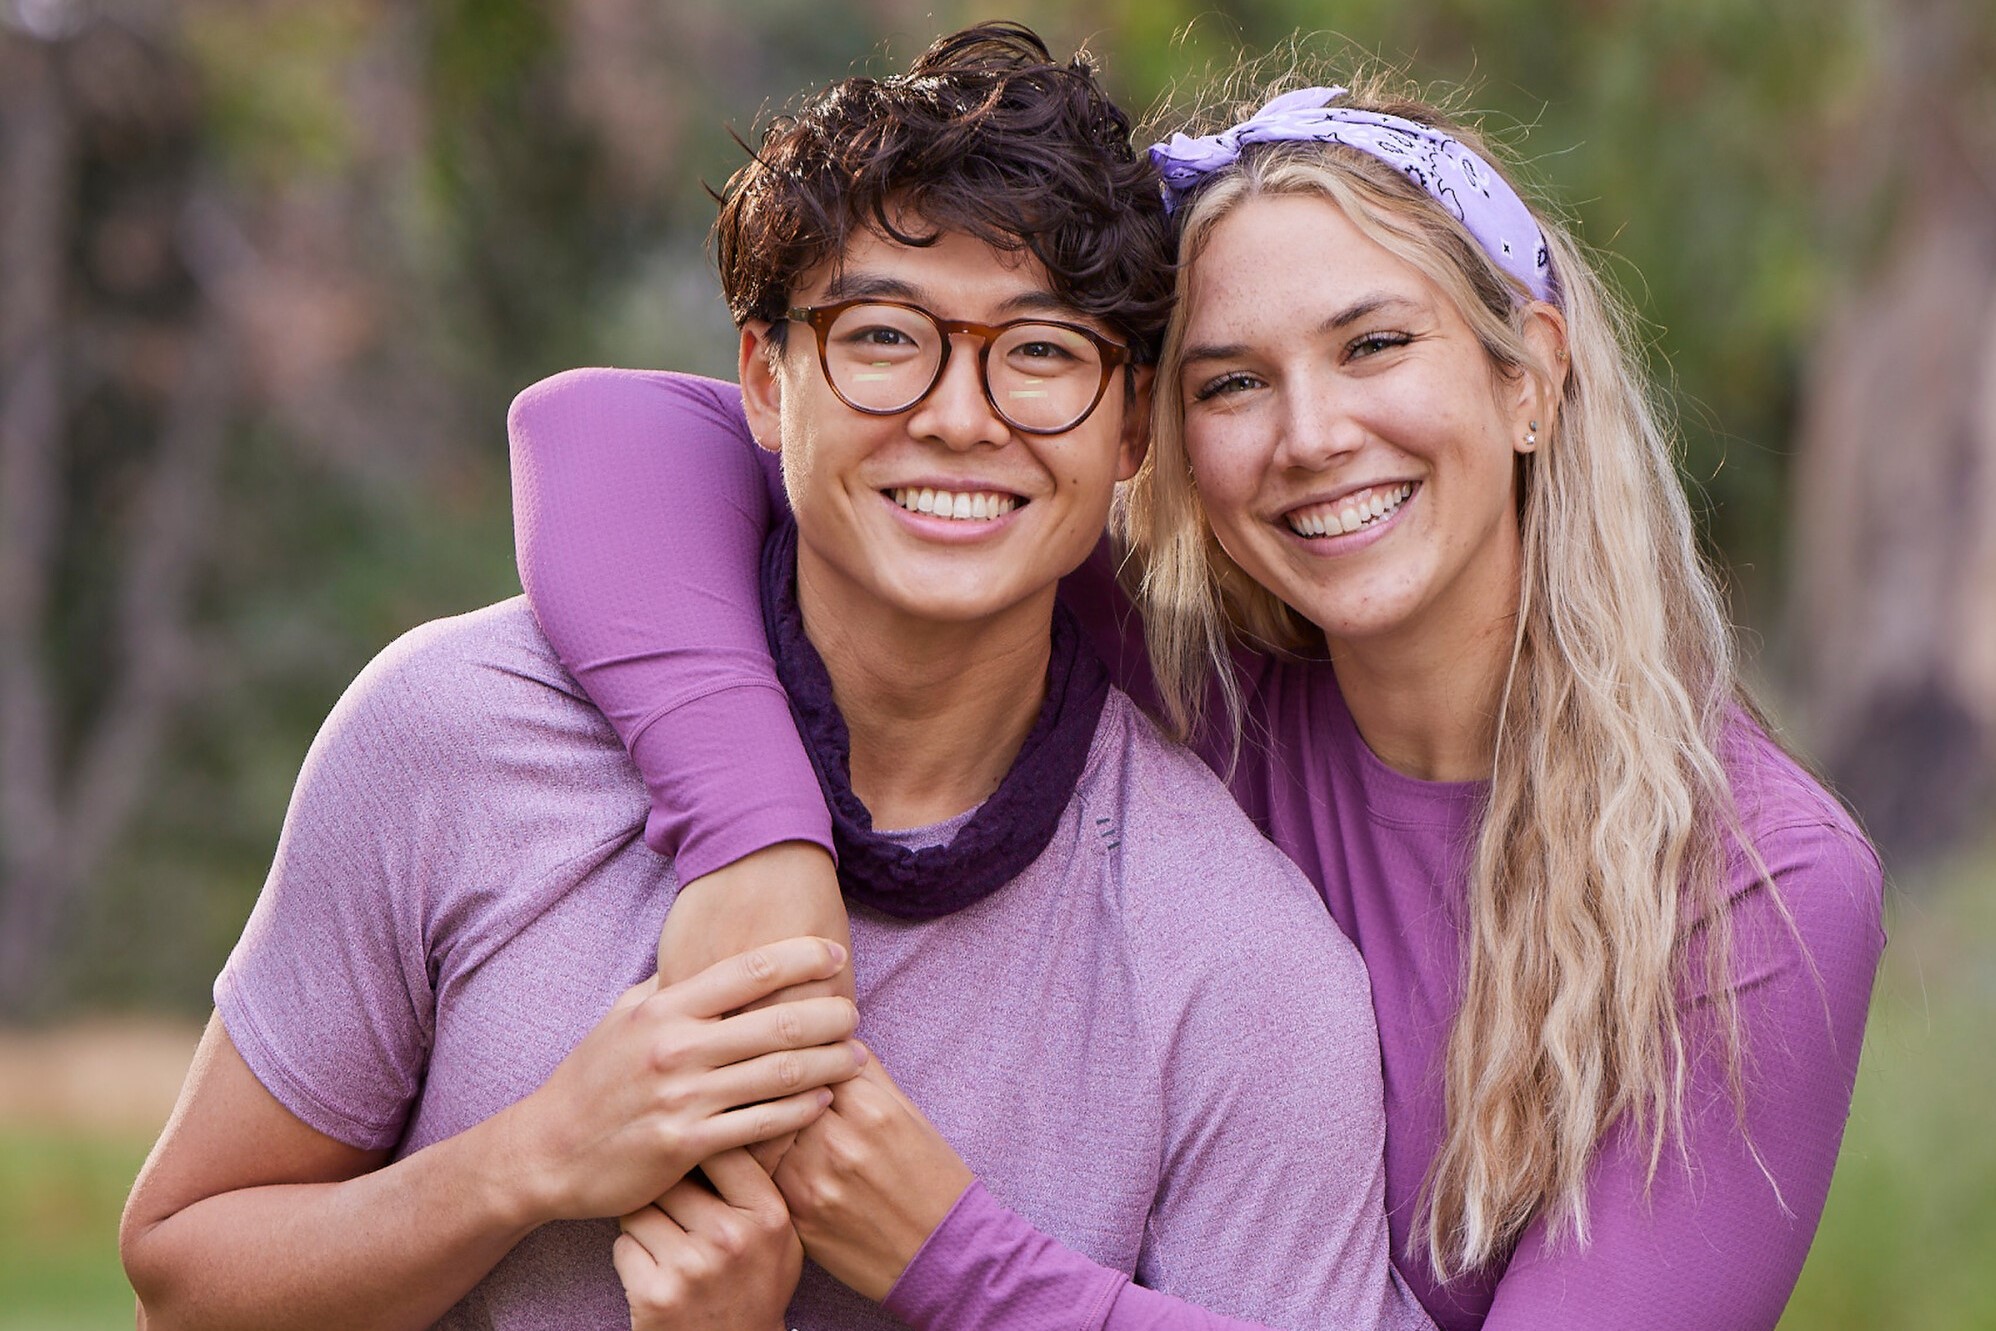 Derek Xiao and Claire Rehfuss, who appear in season 34 of CBS' The Amazing Race, pose for publicity photos. Derek wears a light purple shirt. Claire is wearing a purple long sleeve shirt.